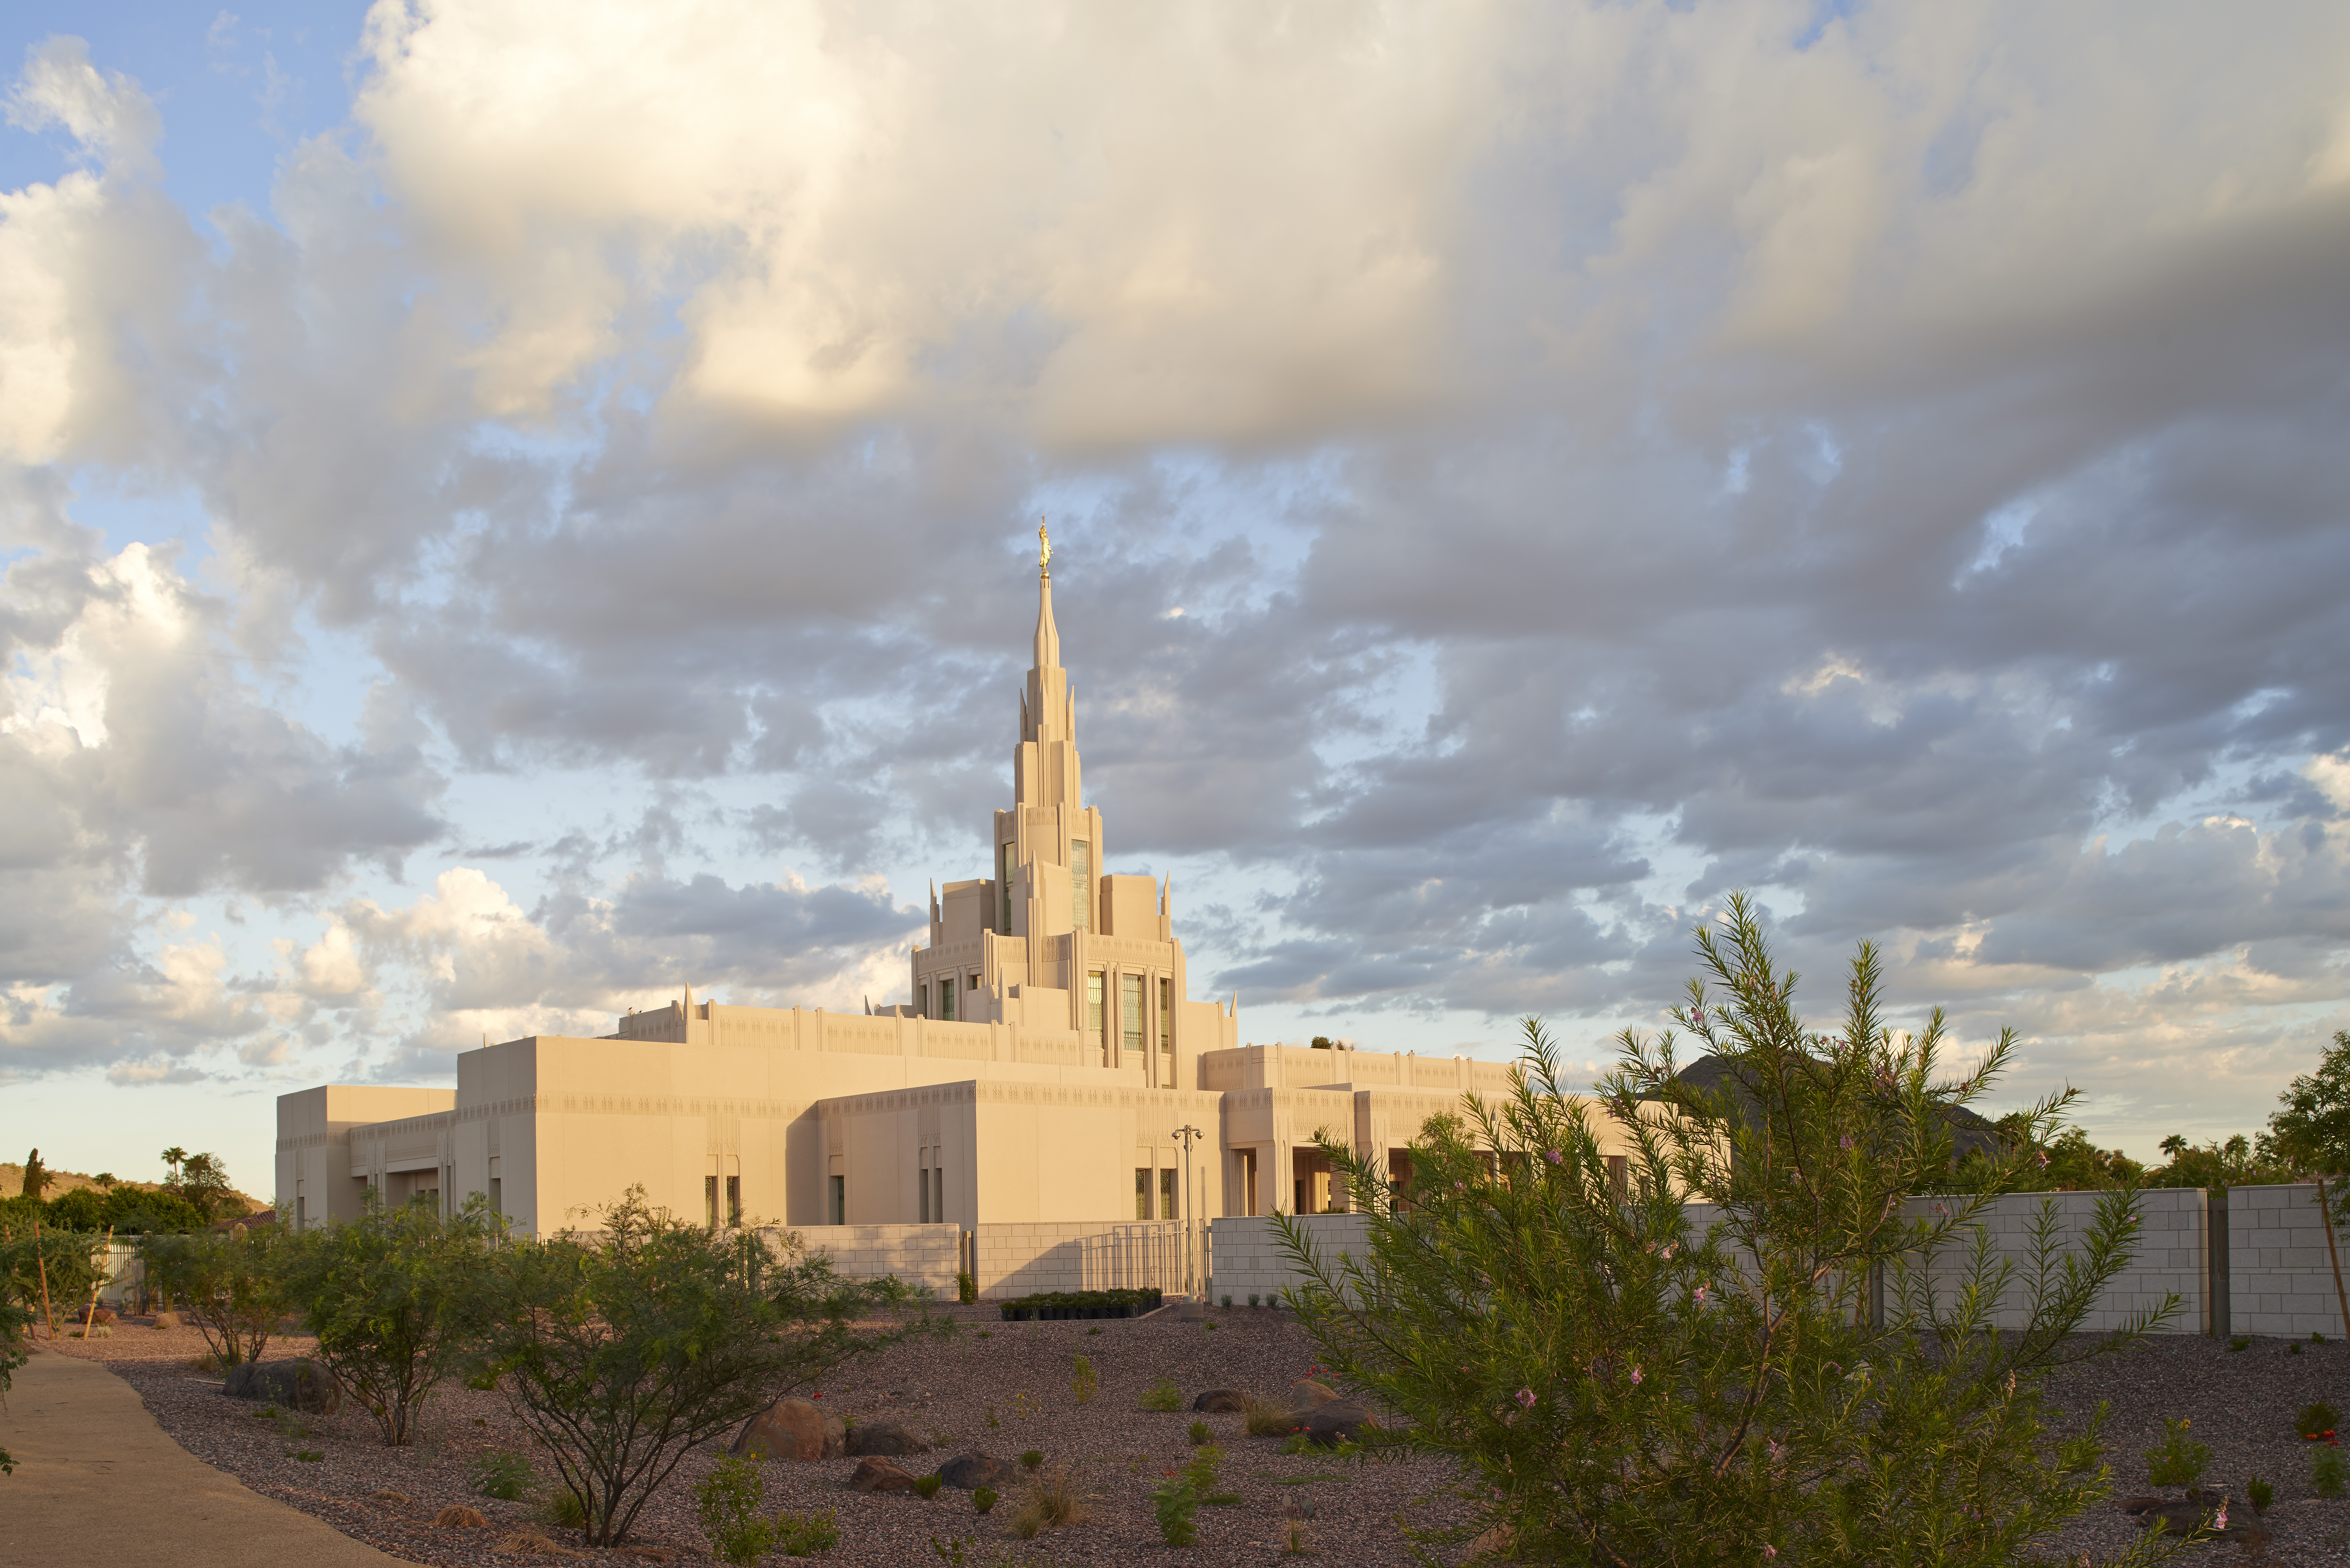 The Phoenix Arizona Temple during sunset, including scenery and a cloudy sky.